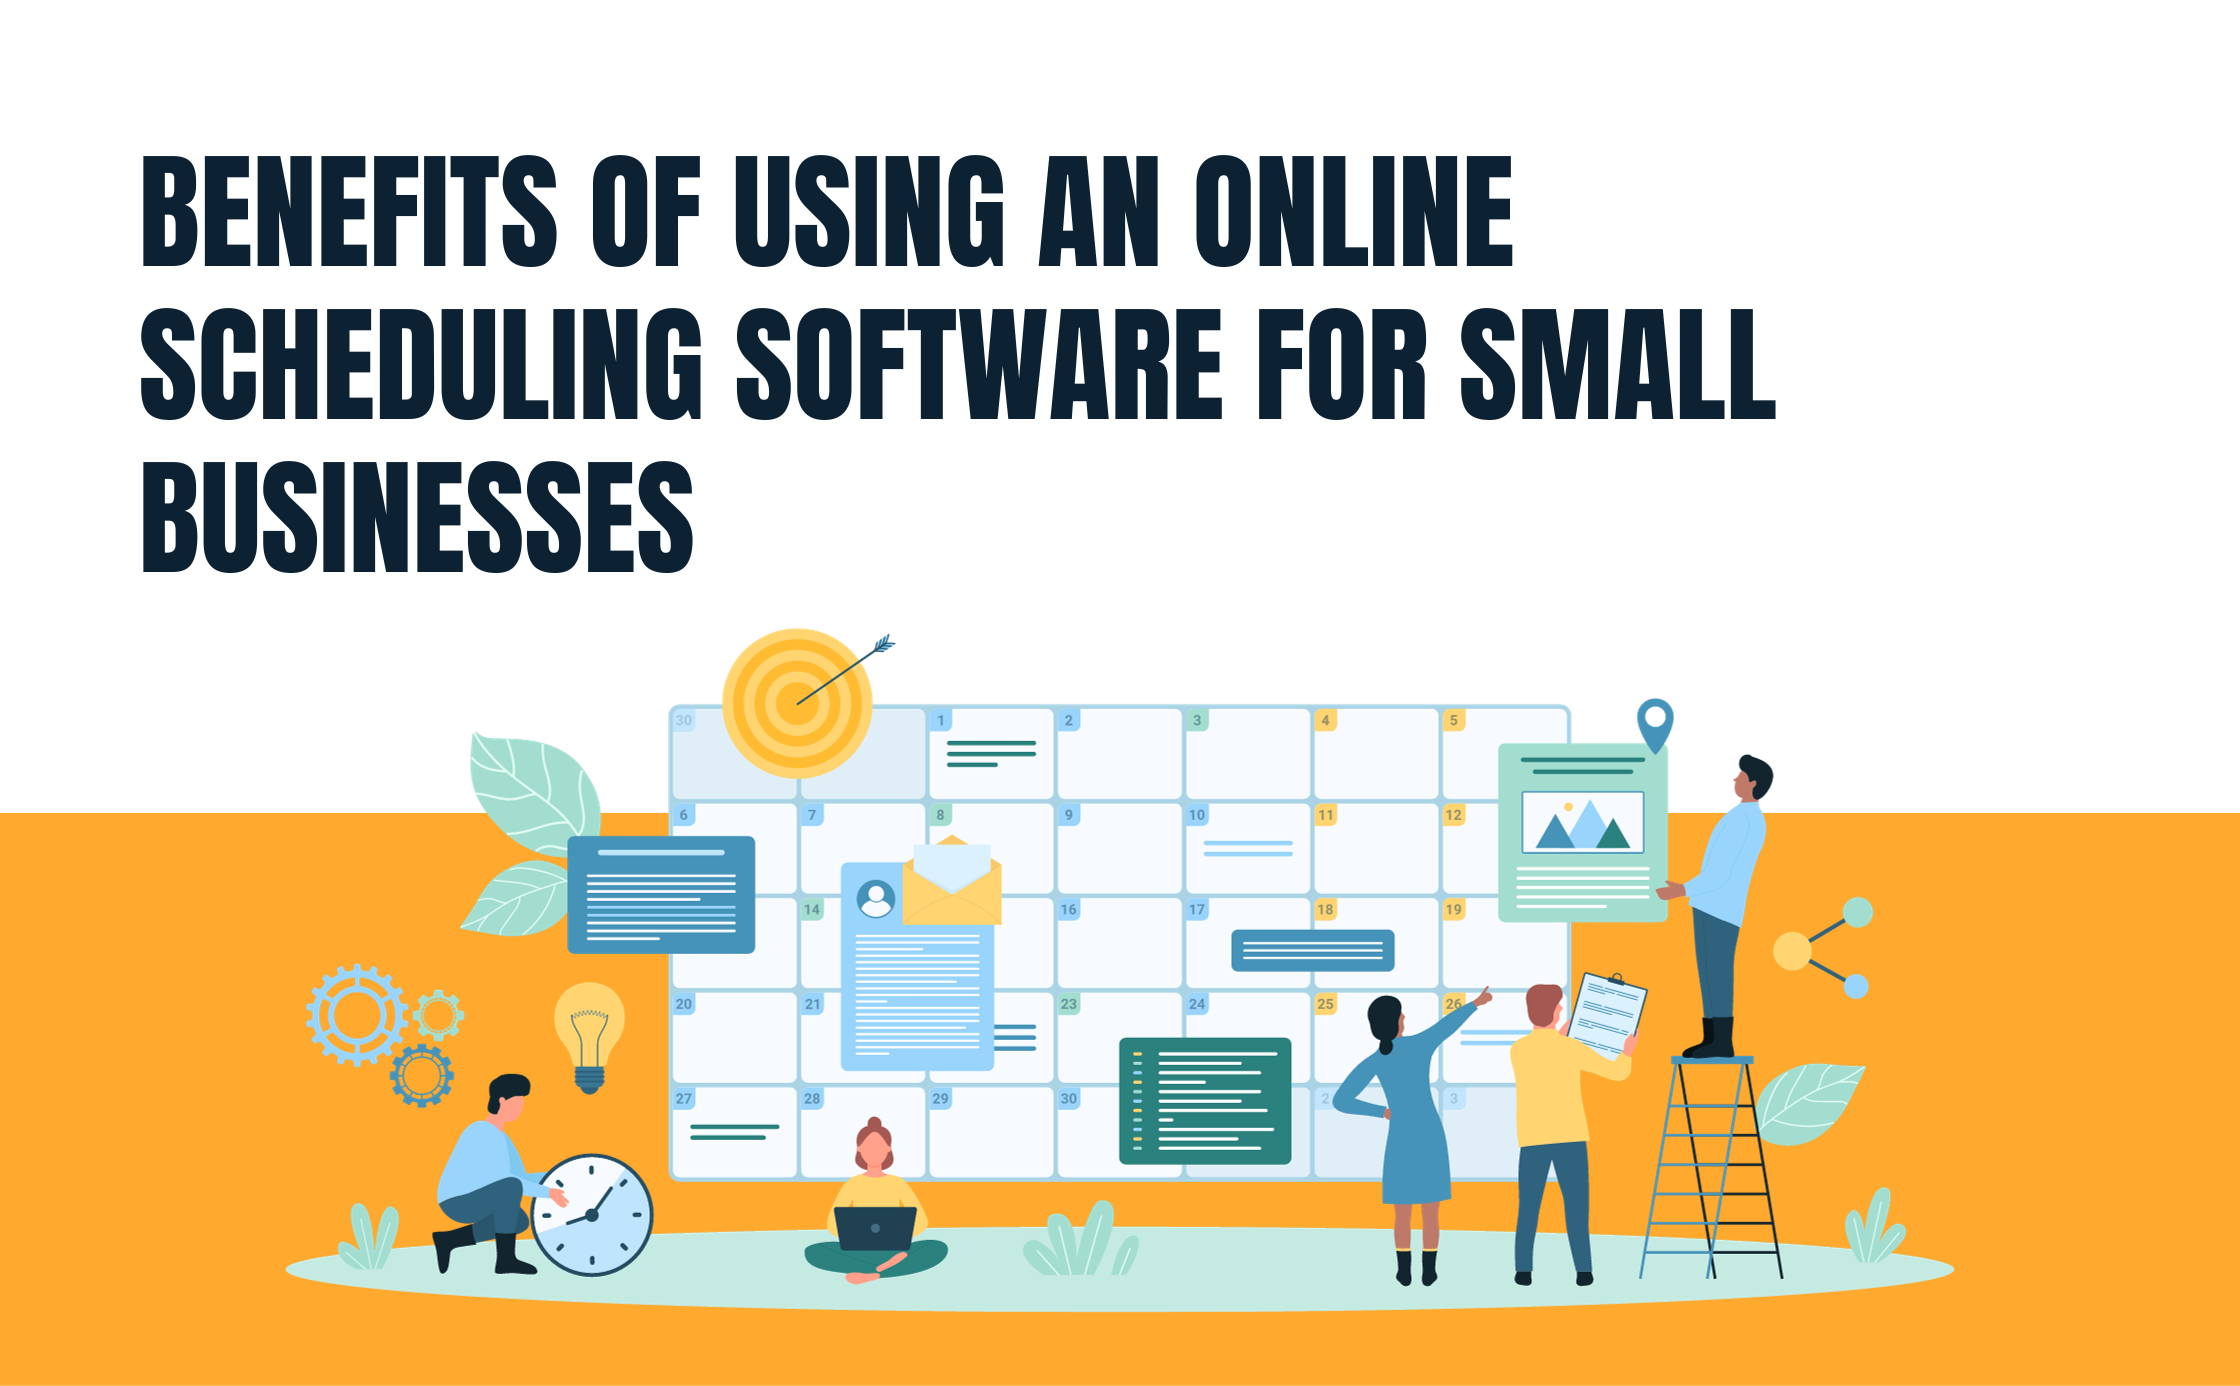 10 Benefits of Using Online Scheduling Software for Small Businesses